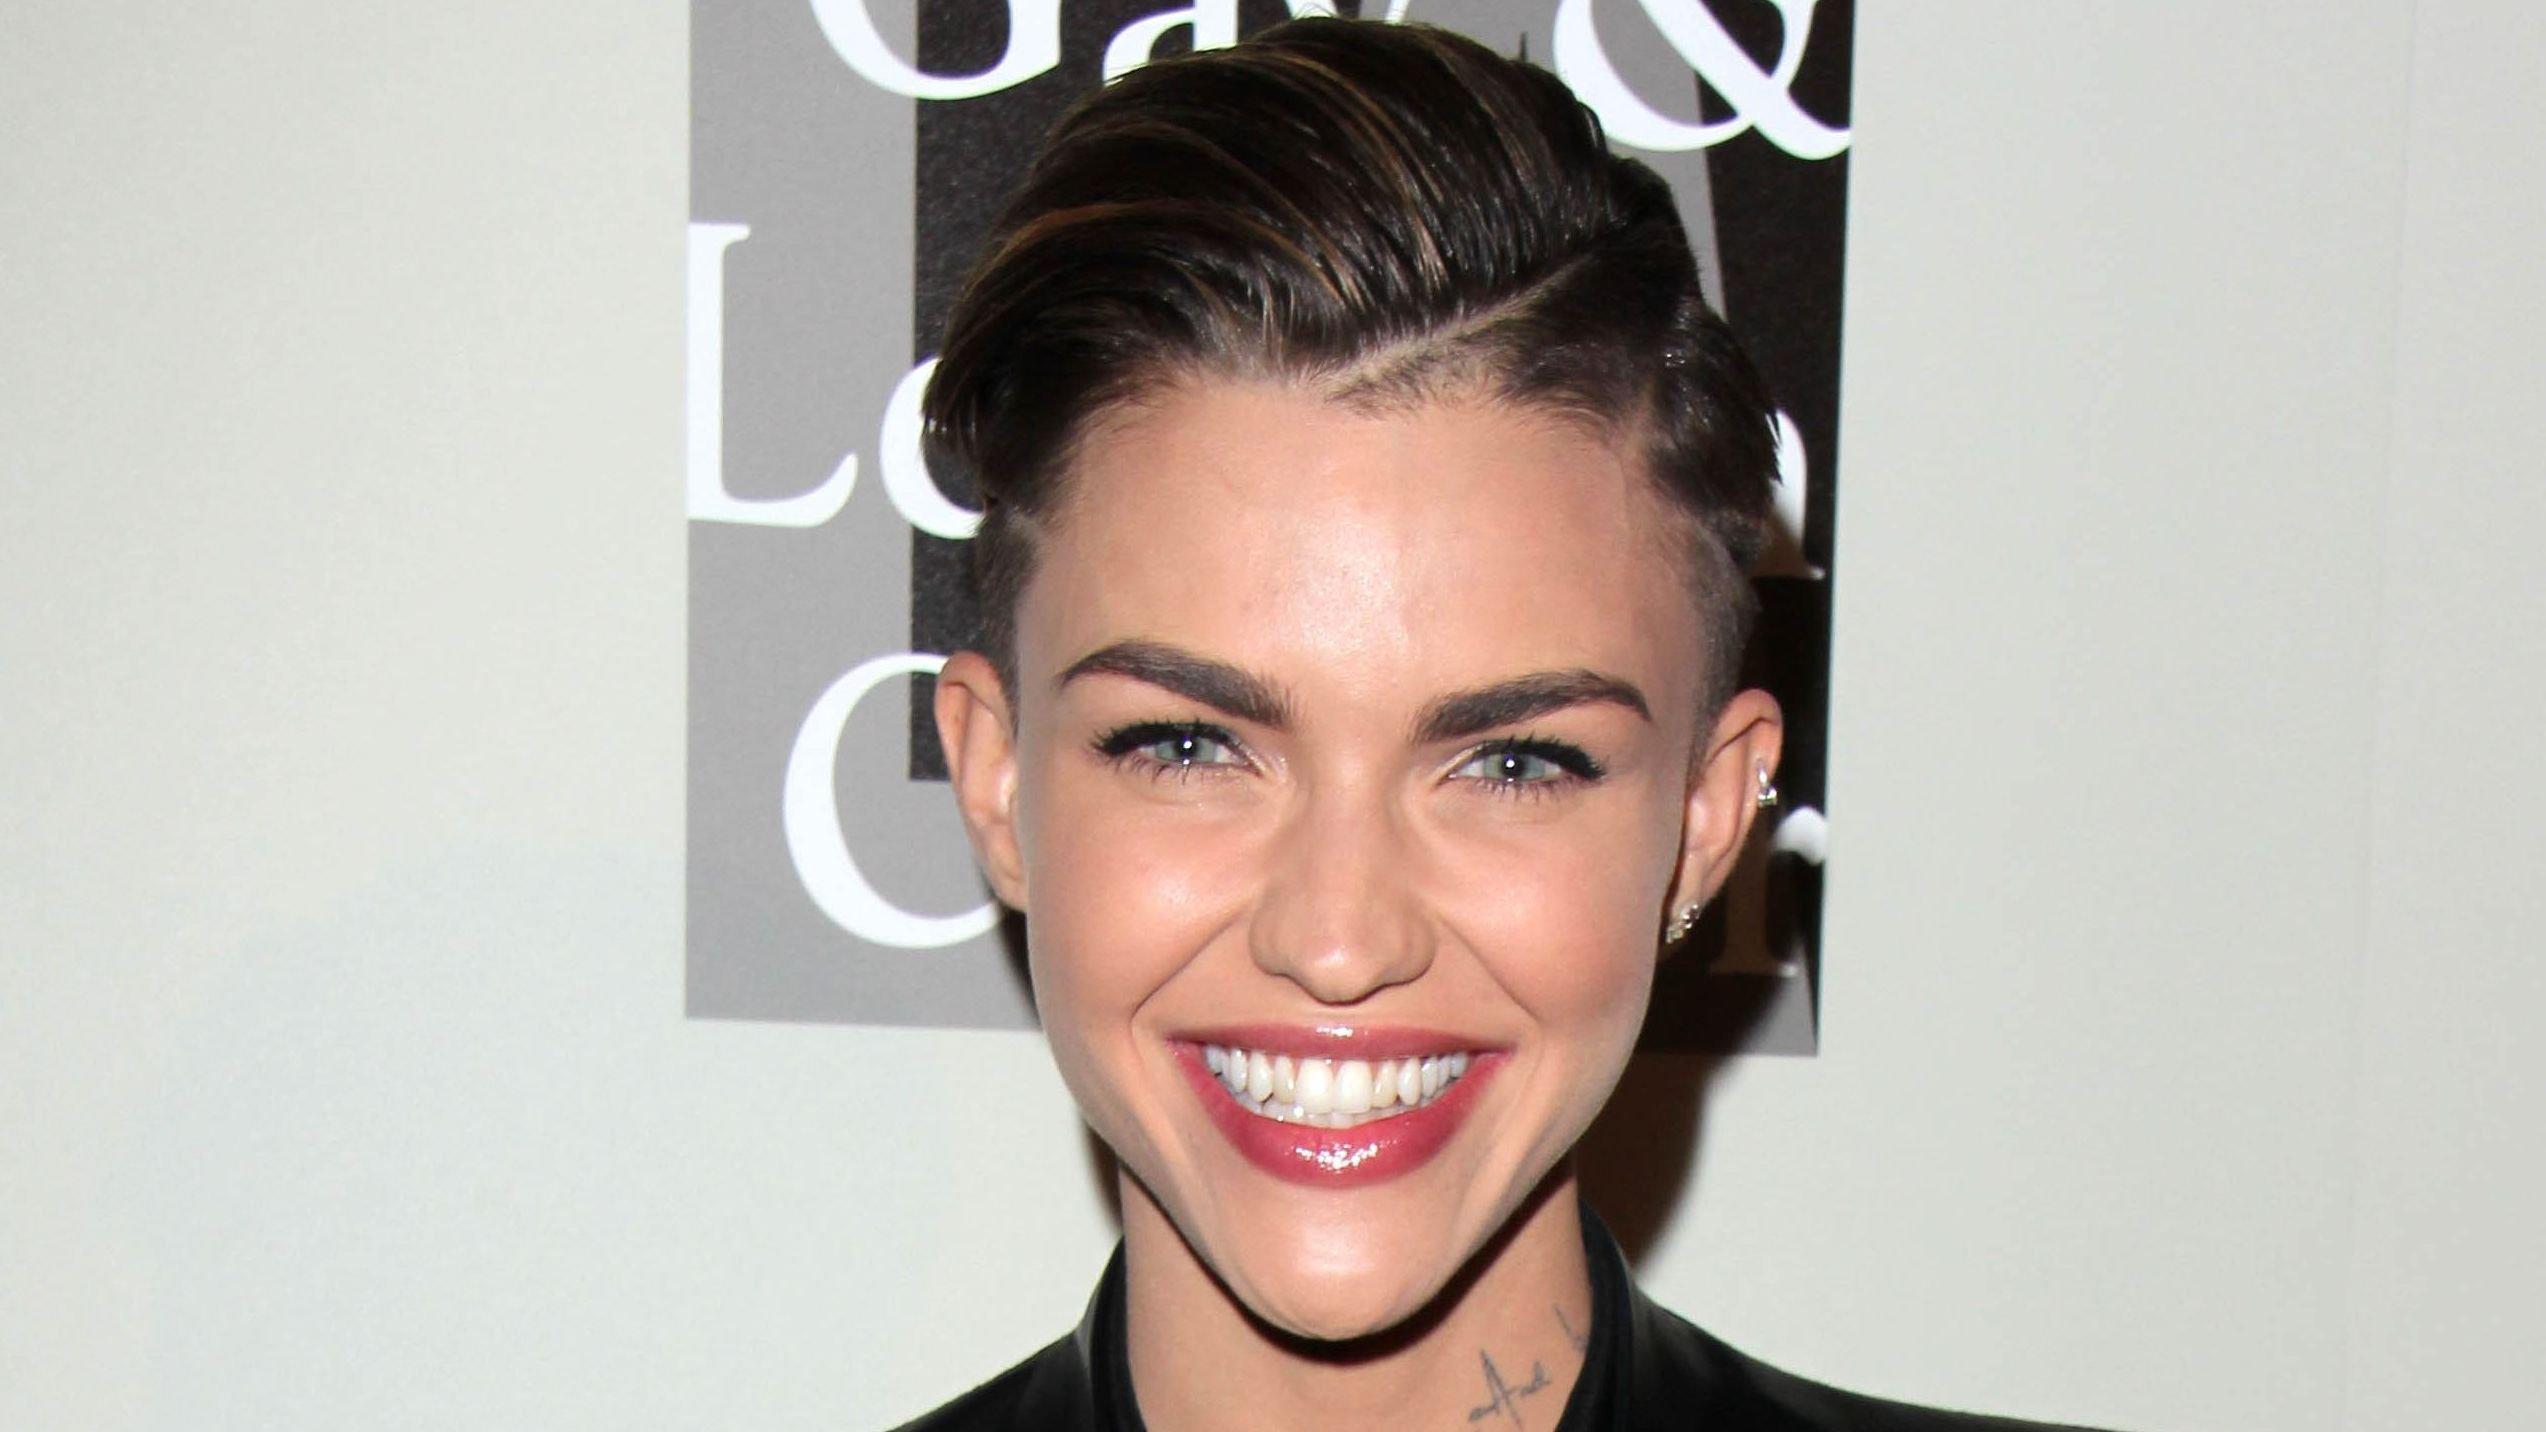 Ruby Rose in all black smiling on a carpet